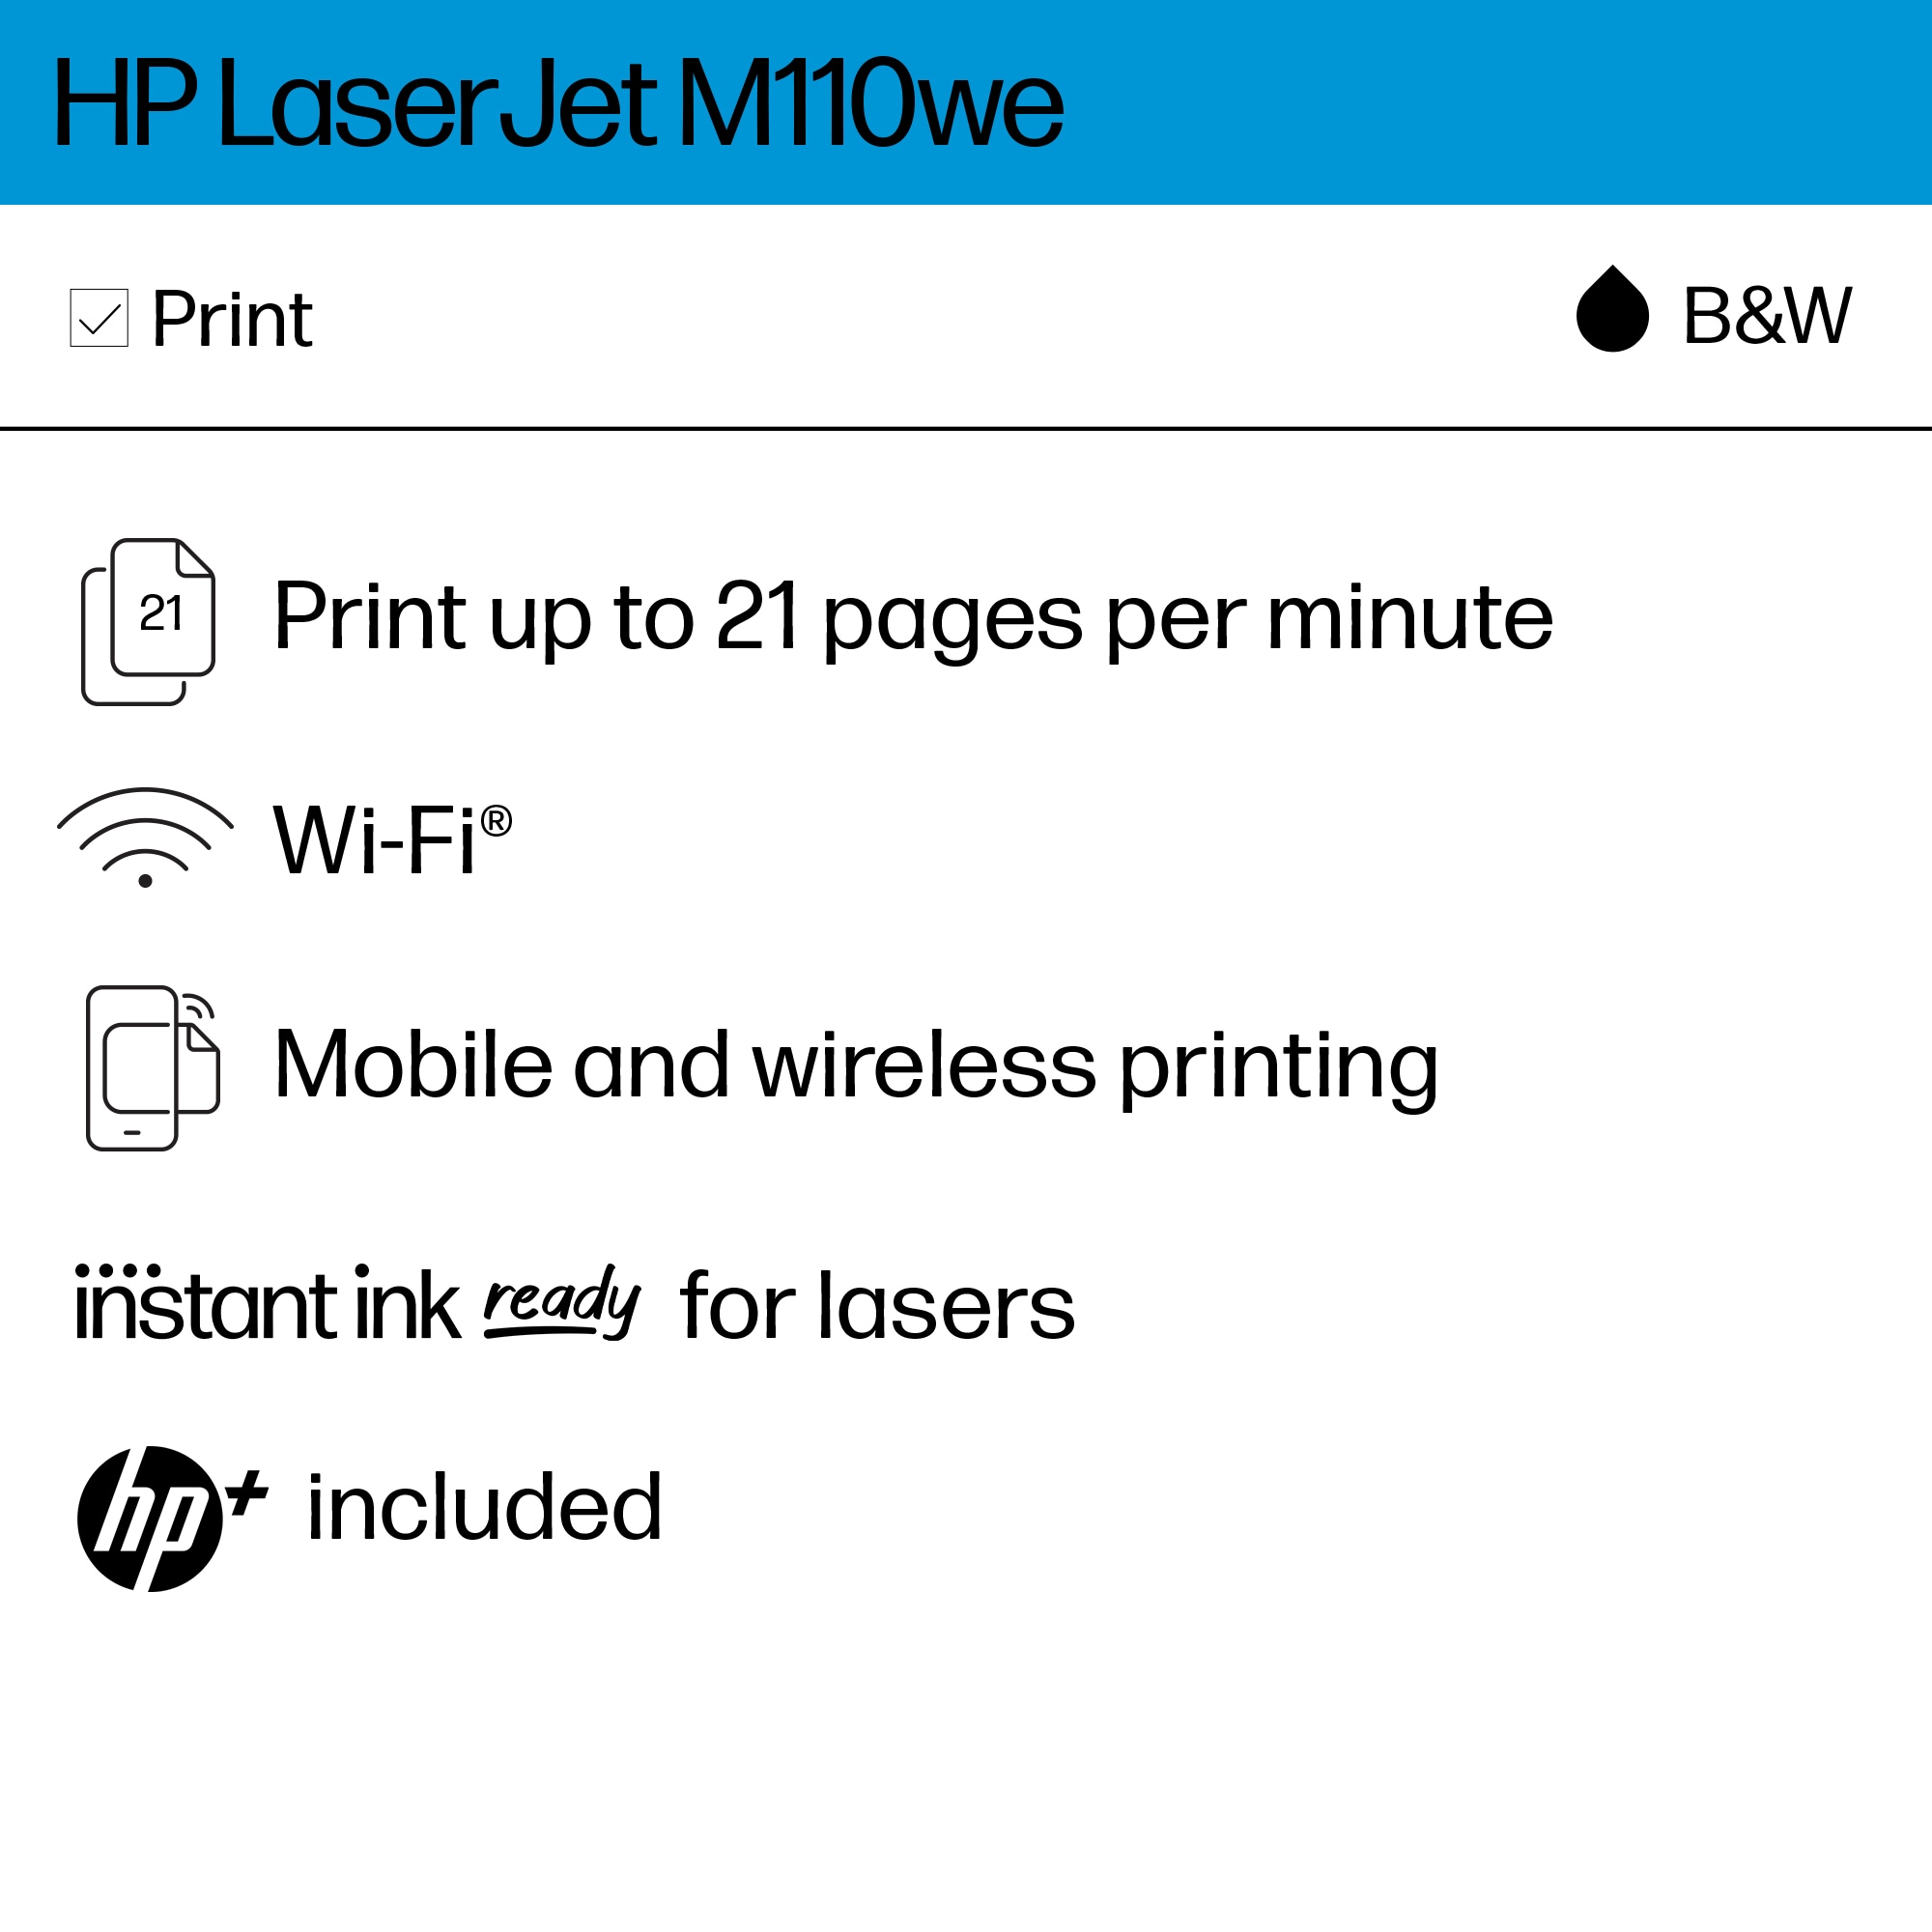 HP LaserJet M110we Printer Instant Ink and HP+ 6 Months with